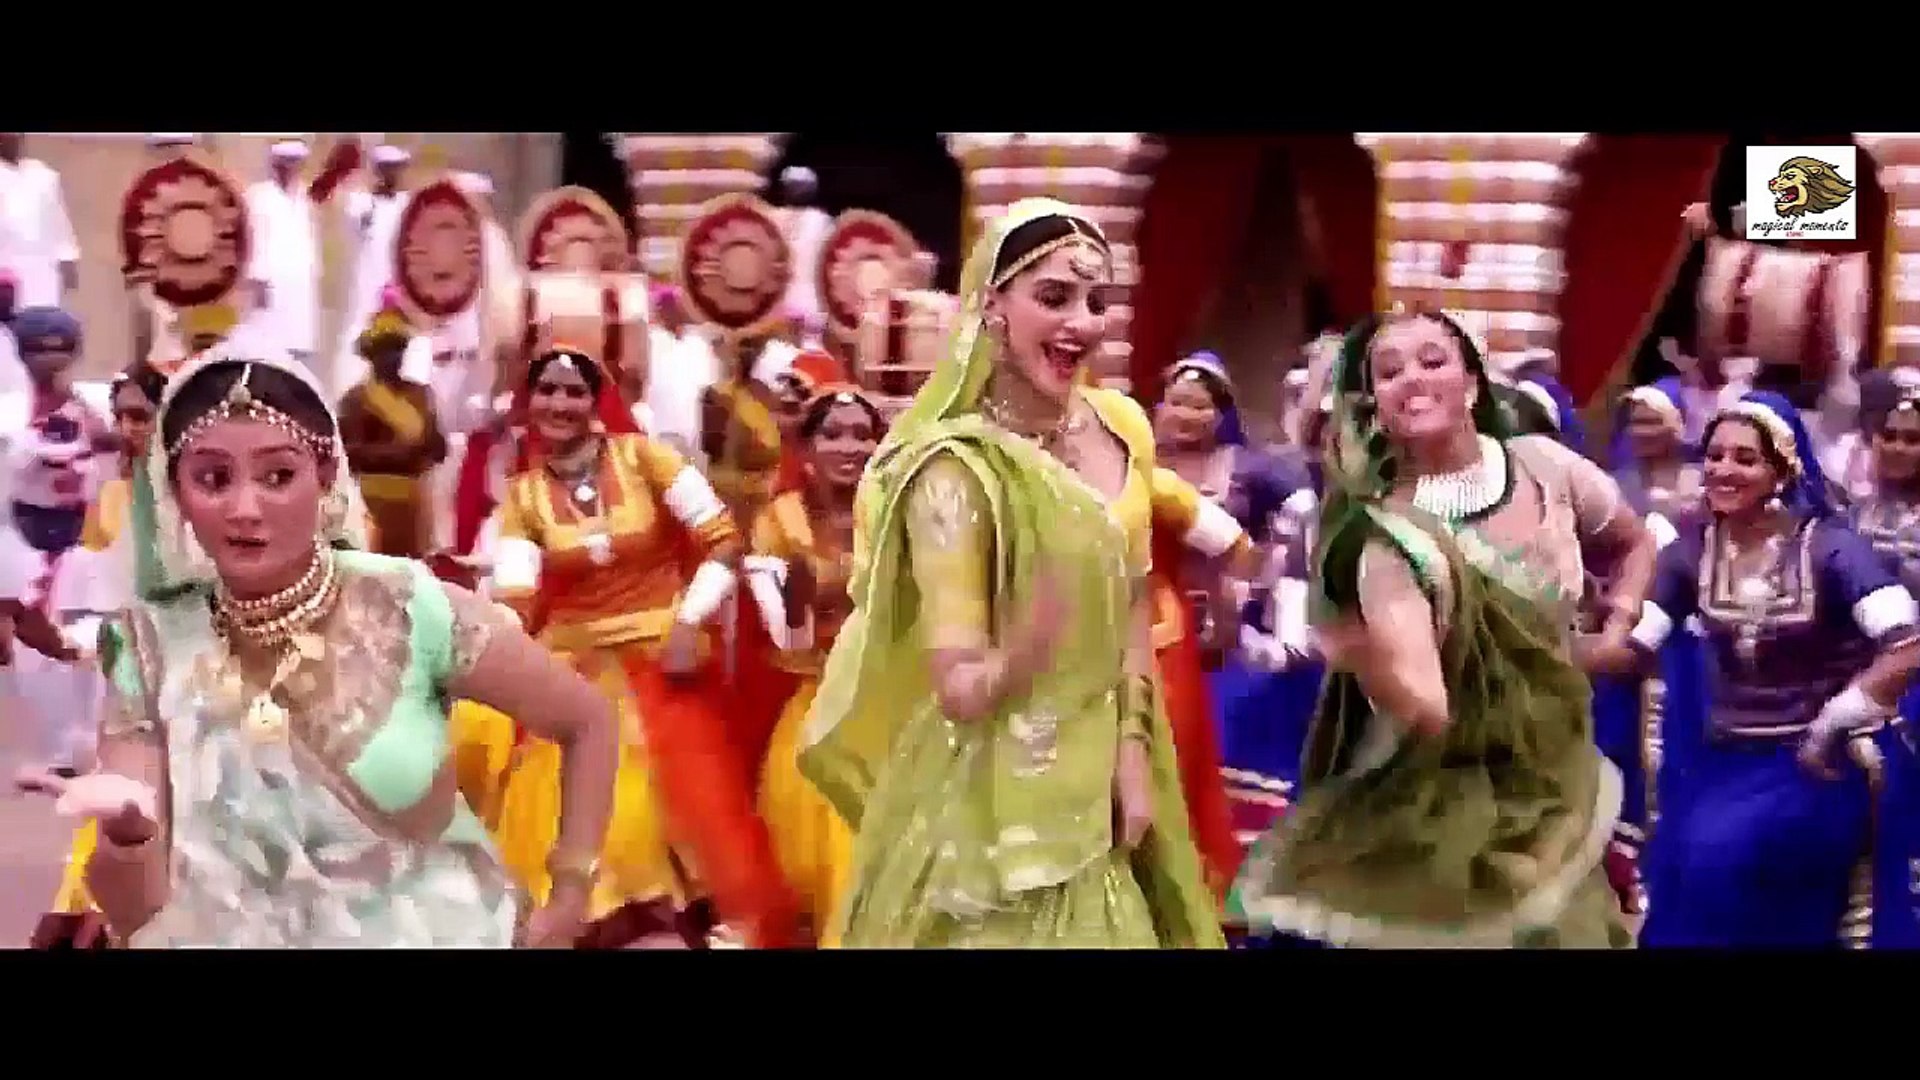 Top 5 Bollywood Dance Songs - [Traditional Hits]